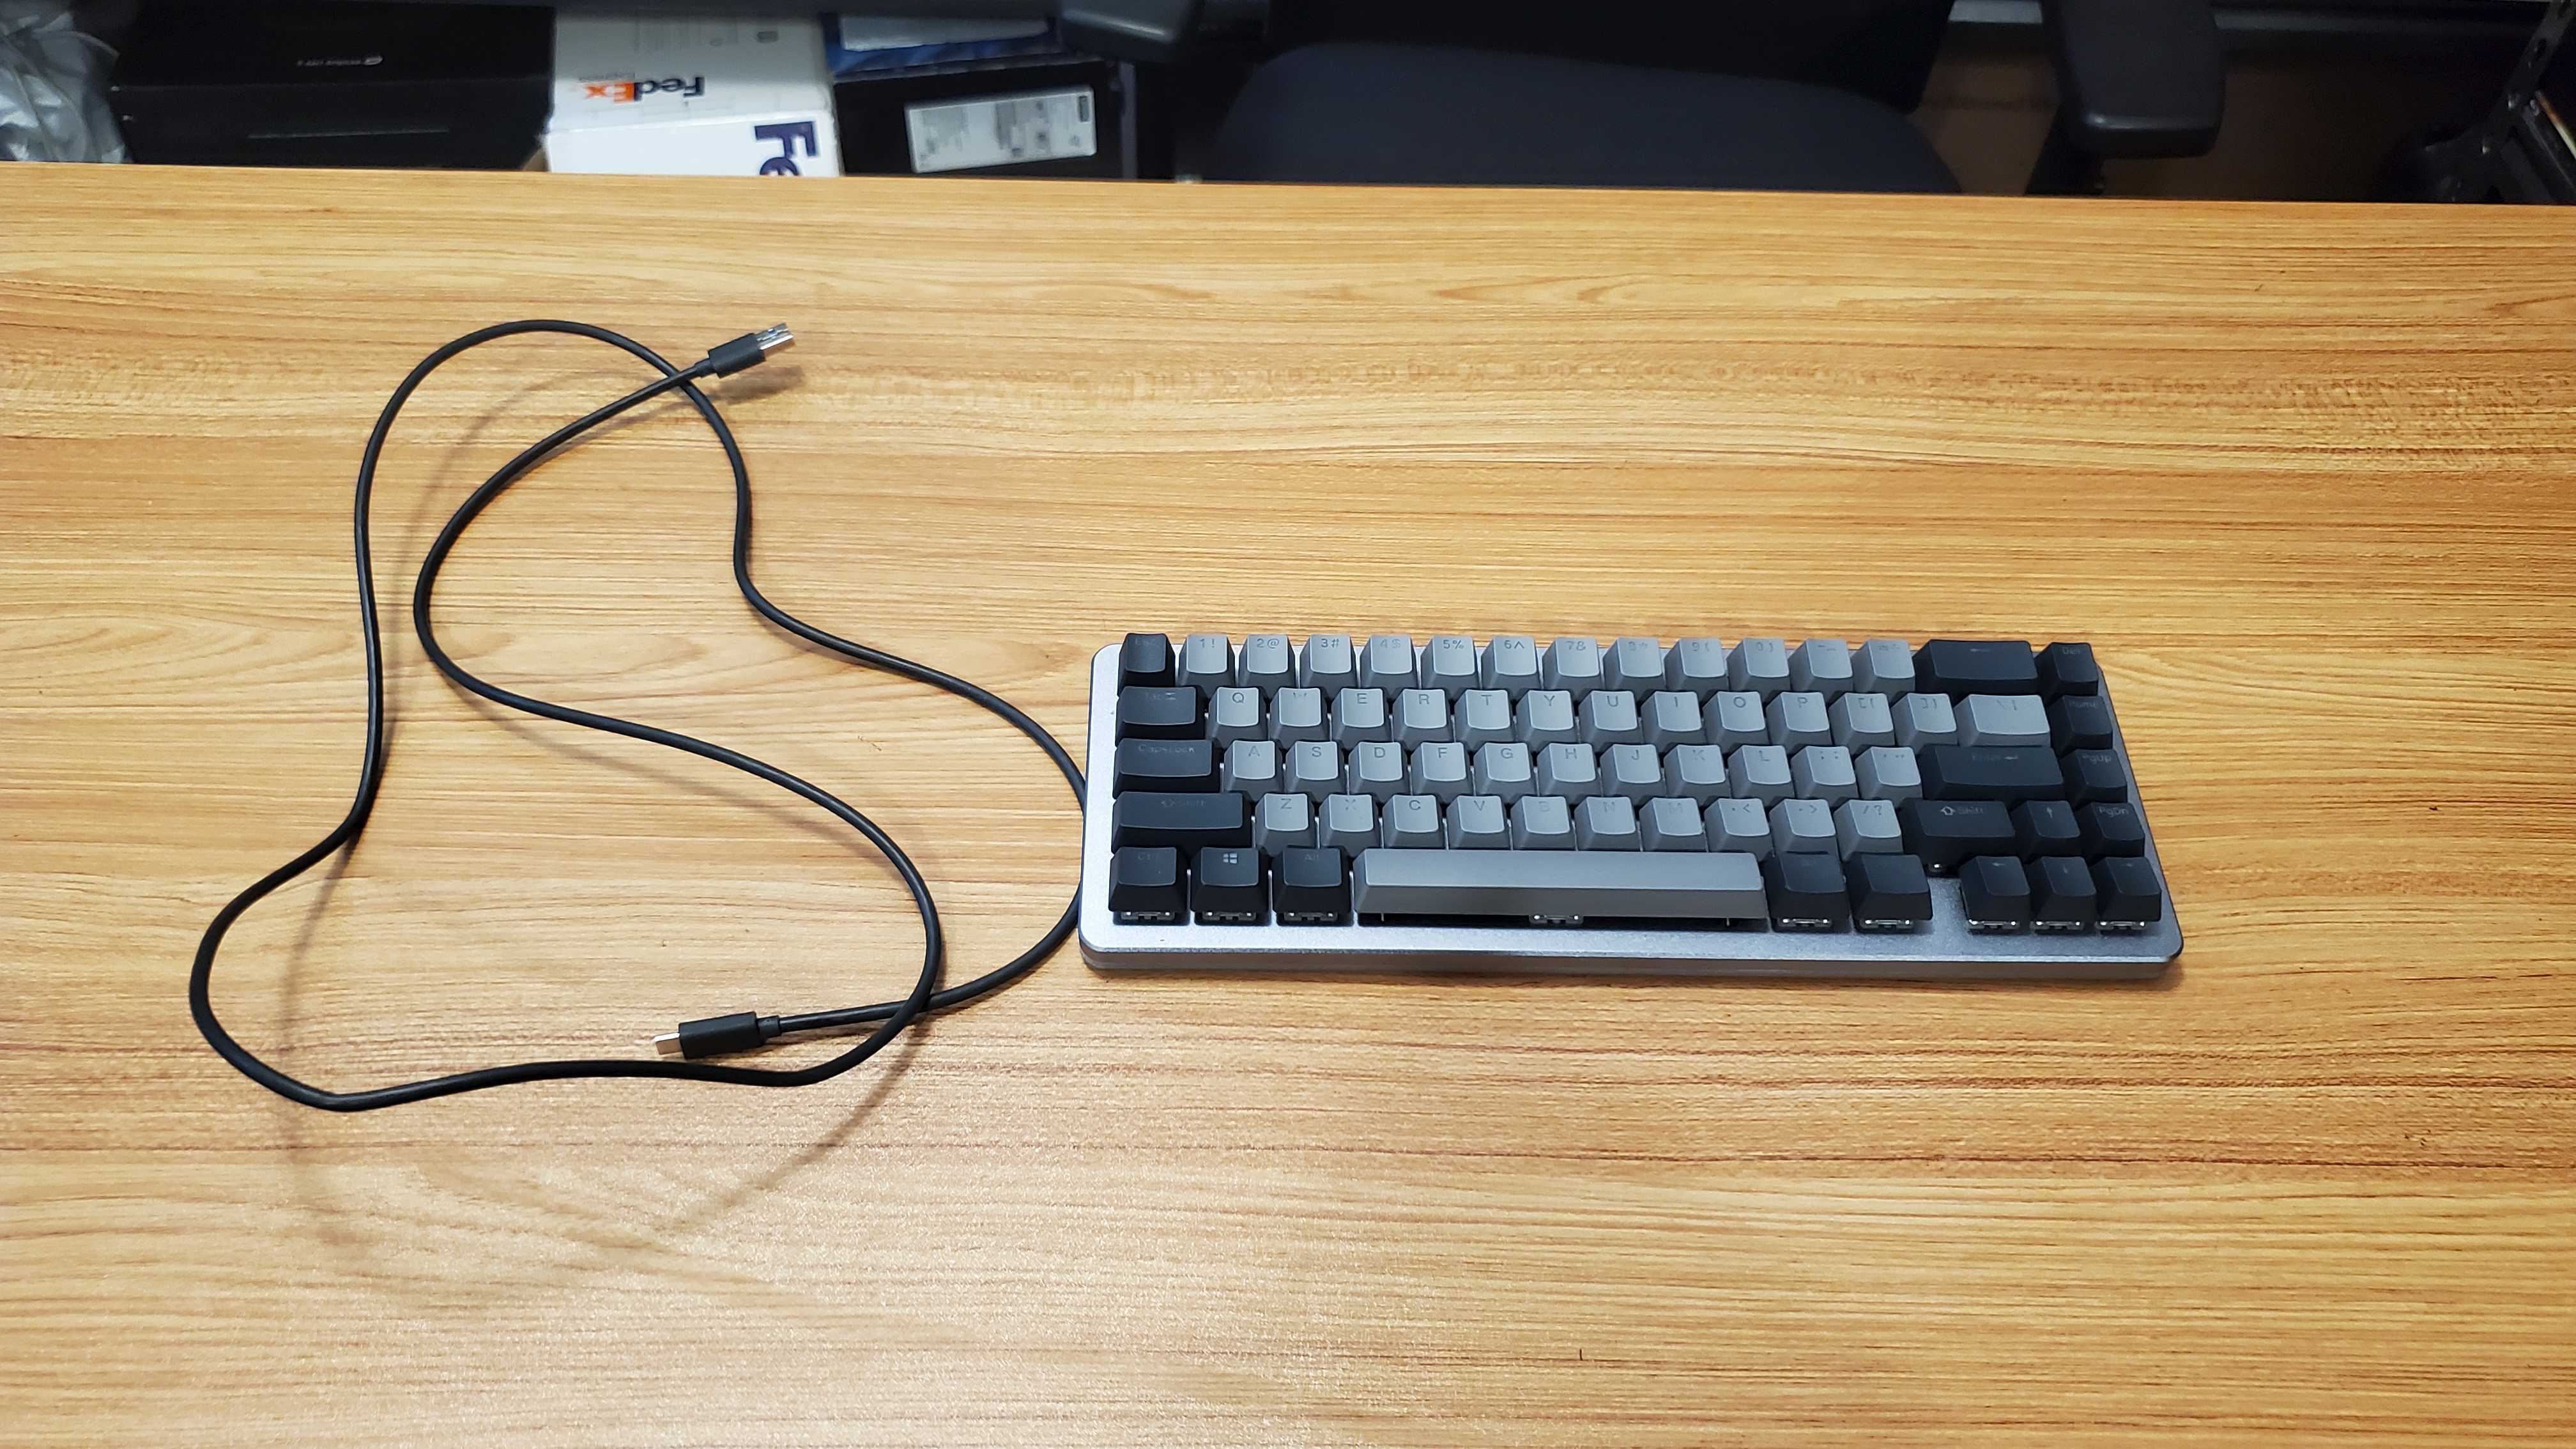 grey Drop ALT mechanical keyboard with cable